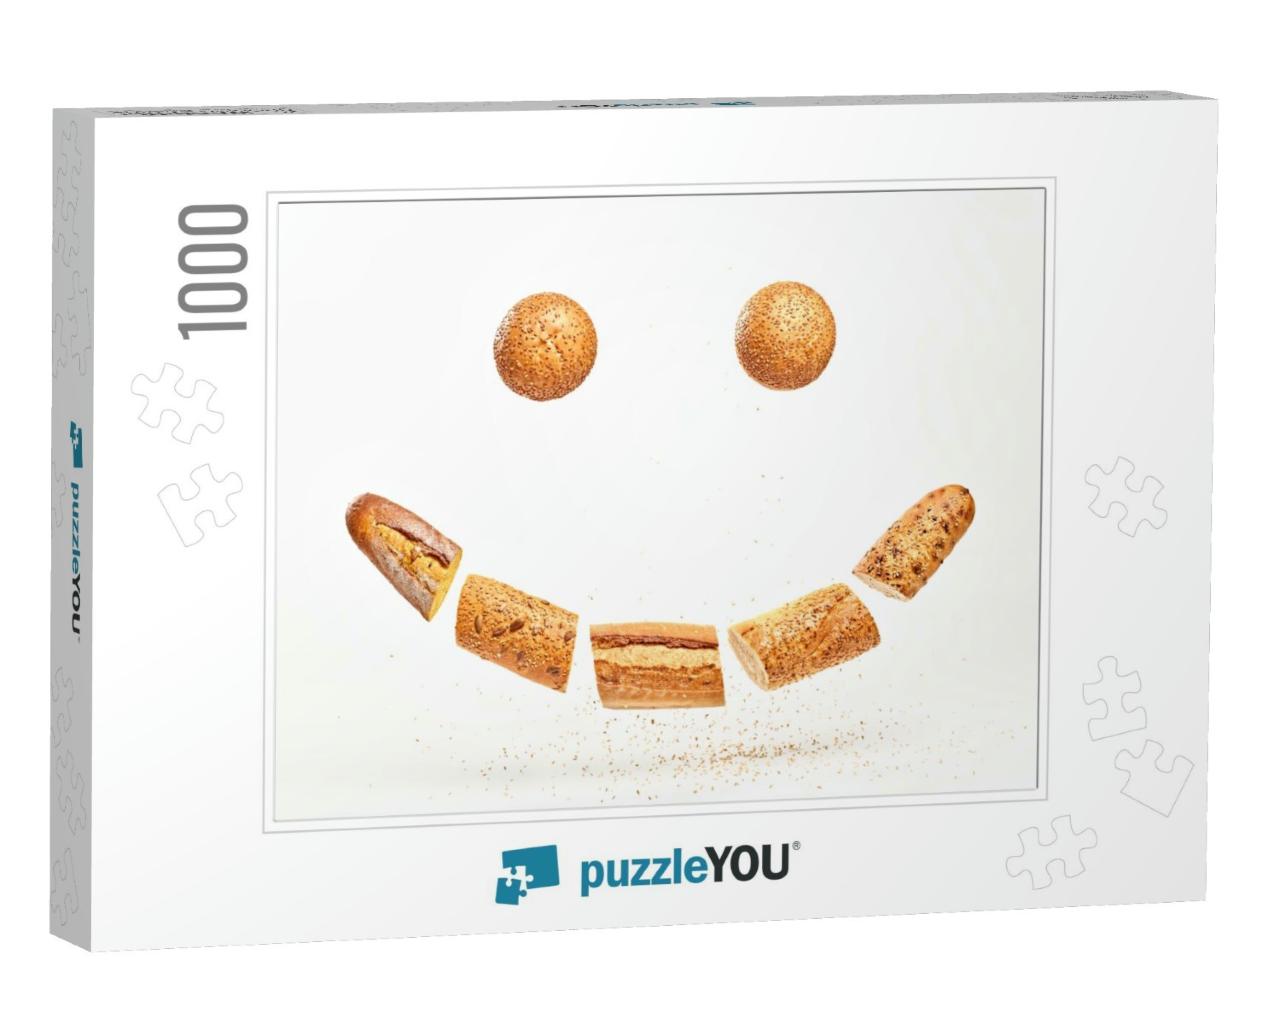 Baguette with Sesame Seed Flying in Air, Smile Shape. Fre... Jigsaw Puzzle with 1000 pieces